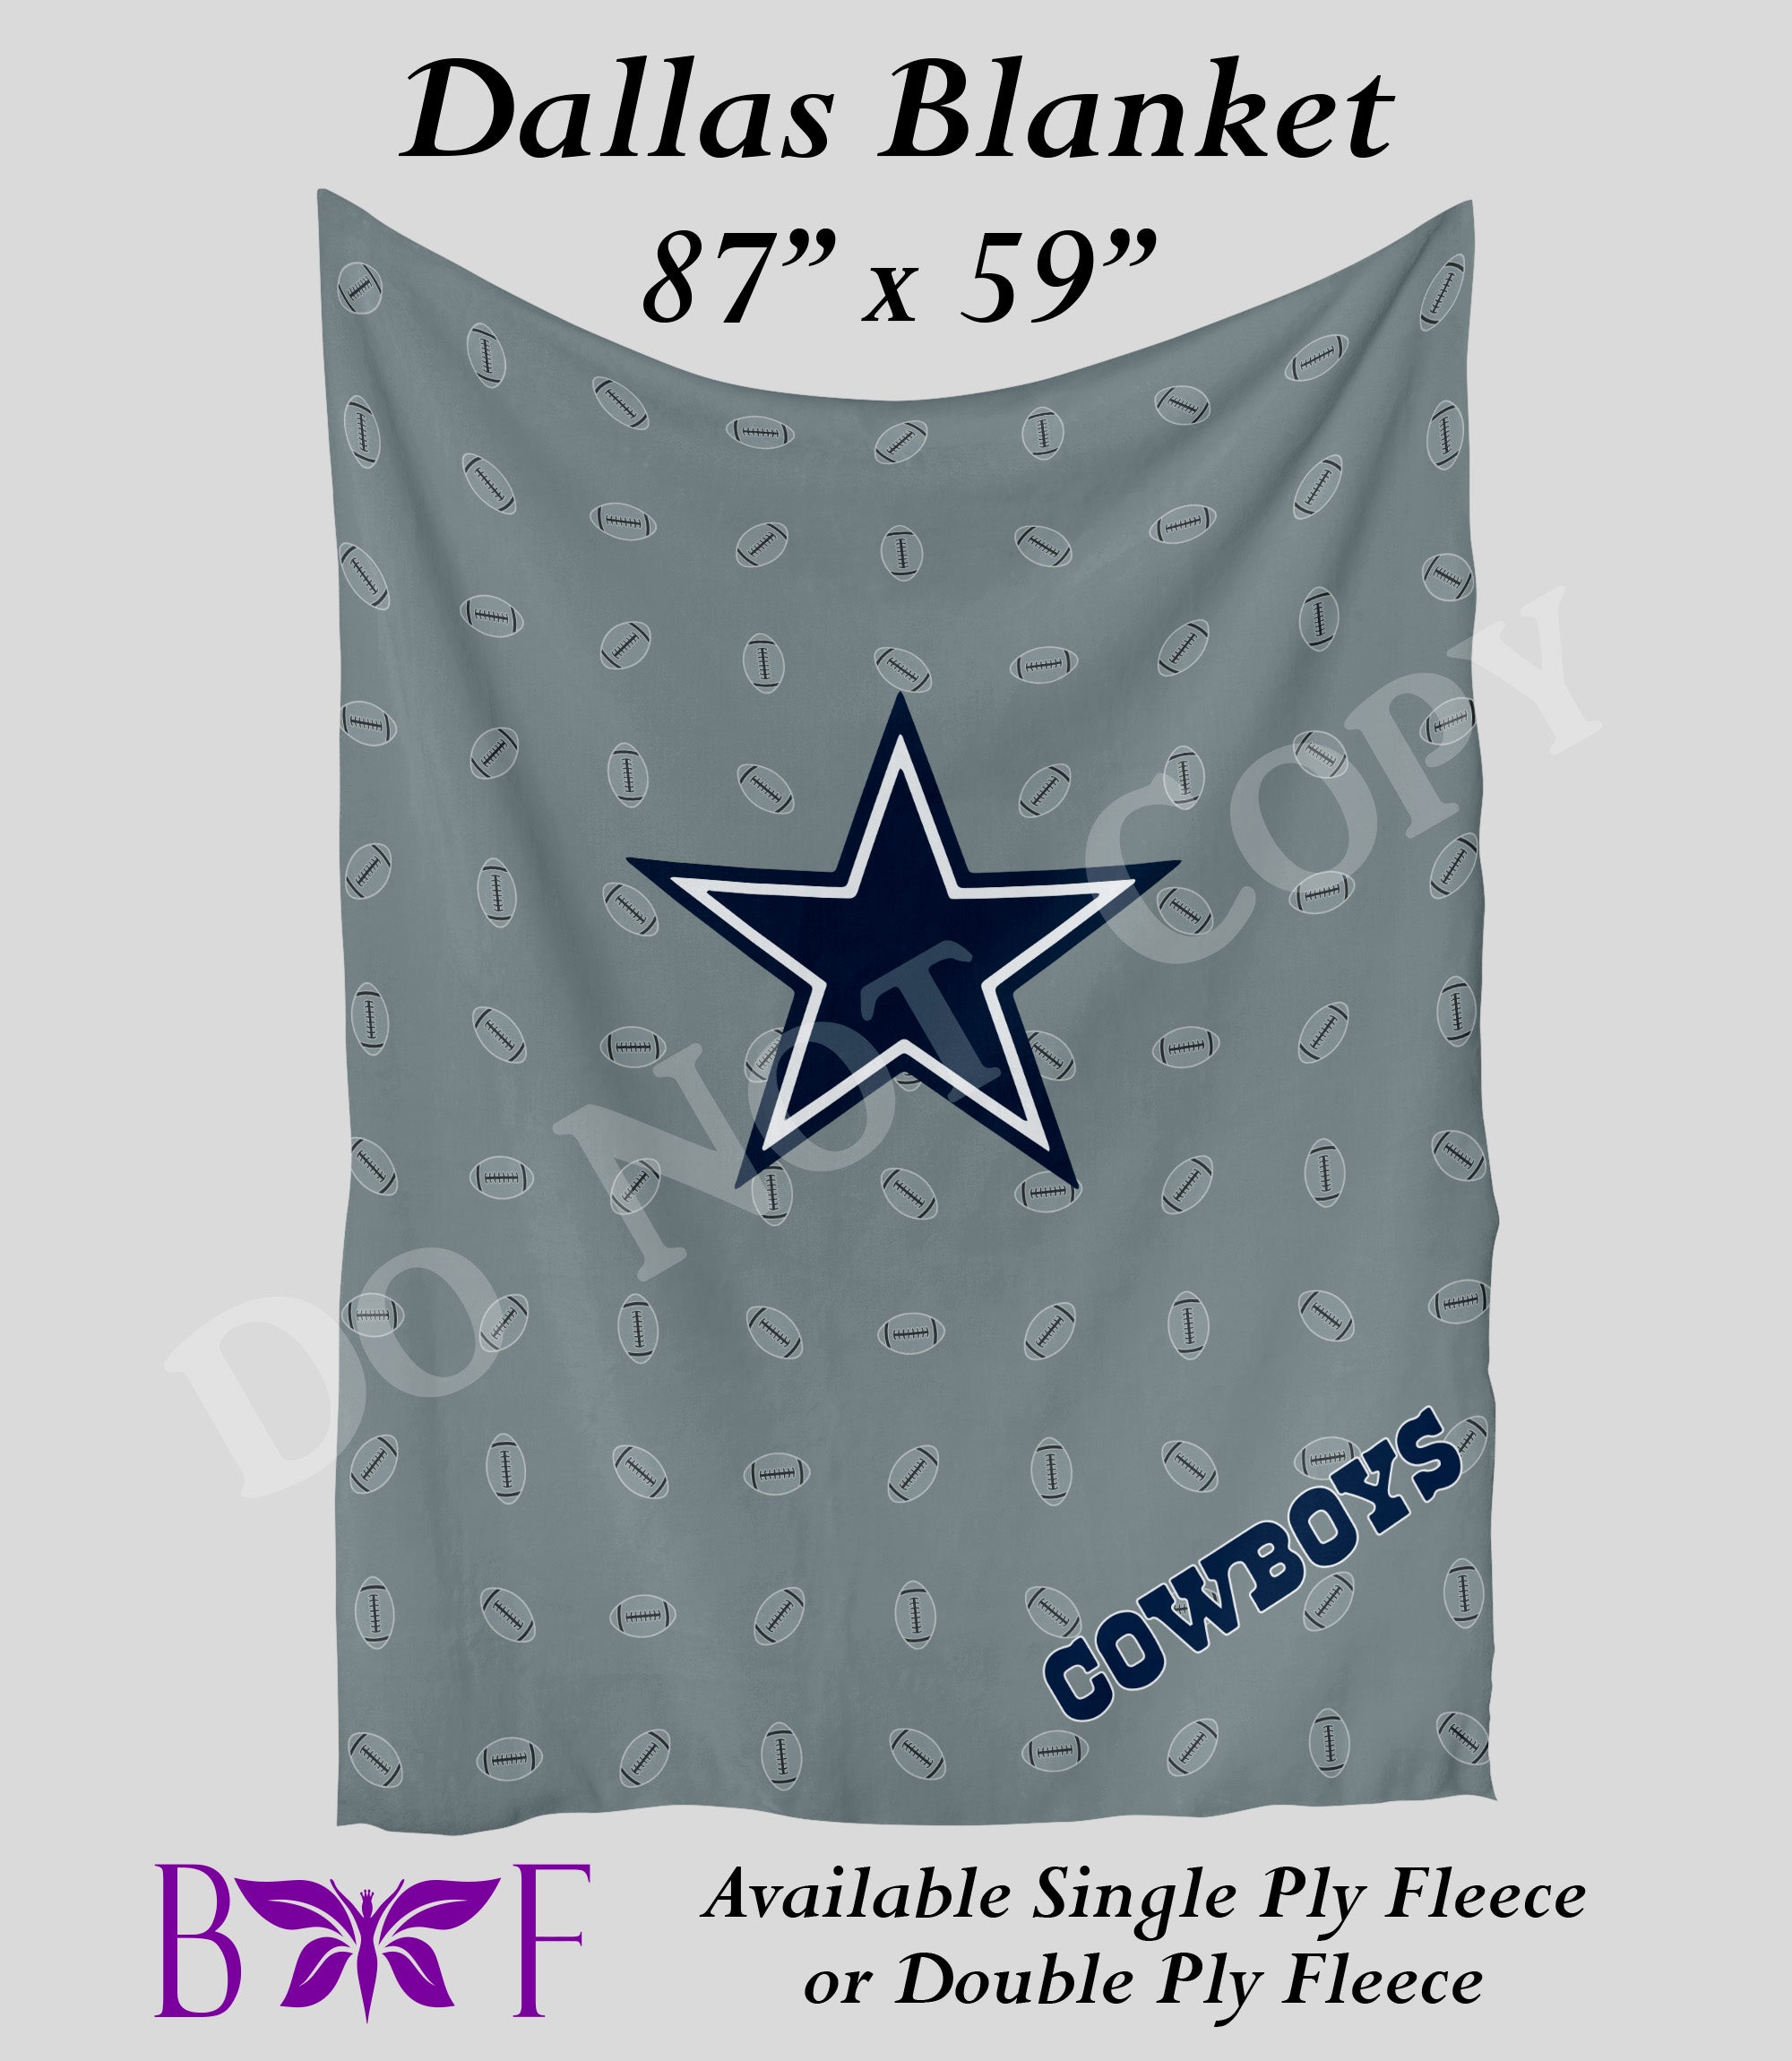 Dallas 59"x87" soft blanket available without sherpa fleece